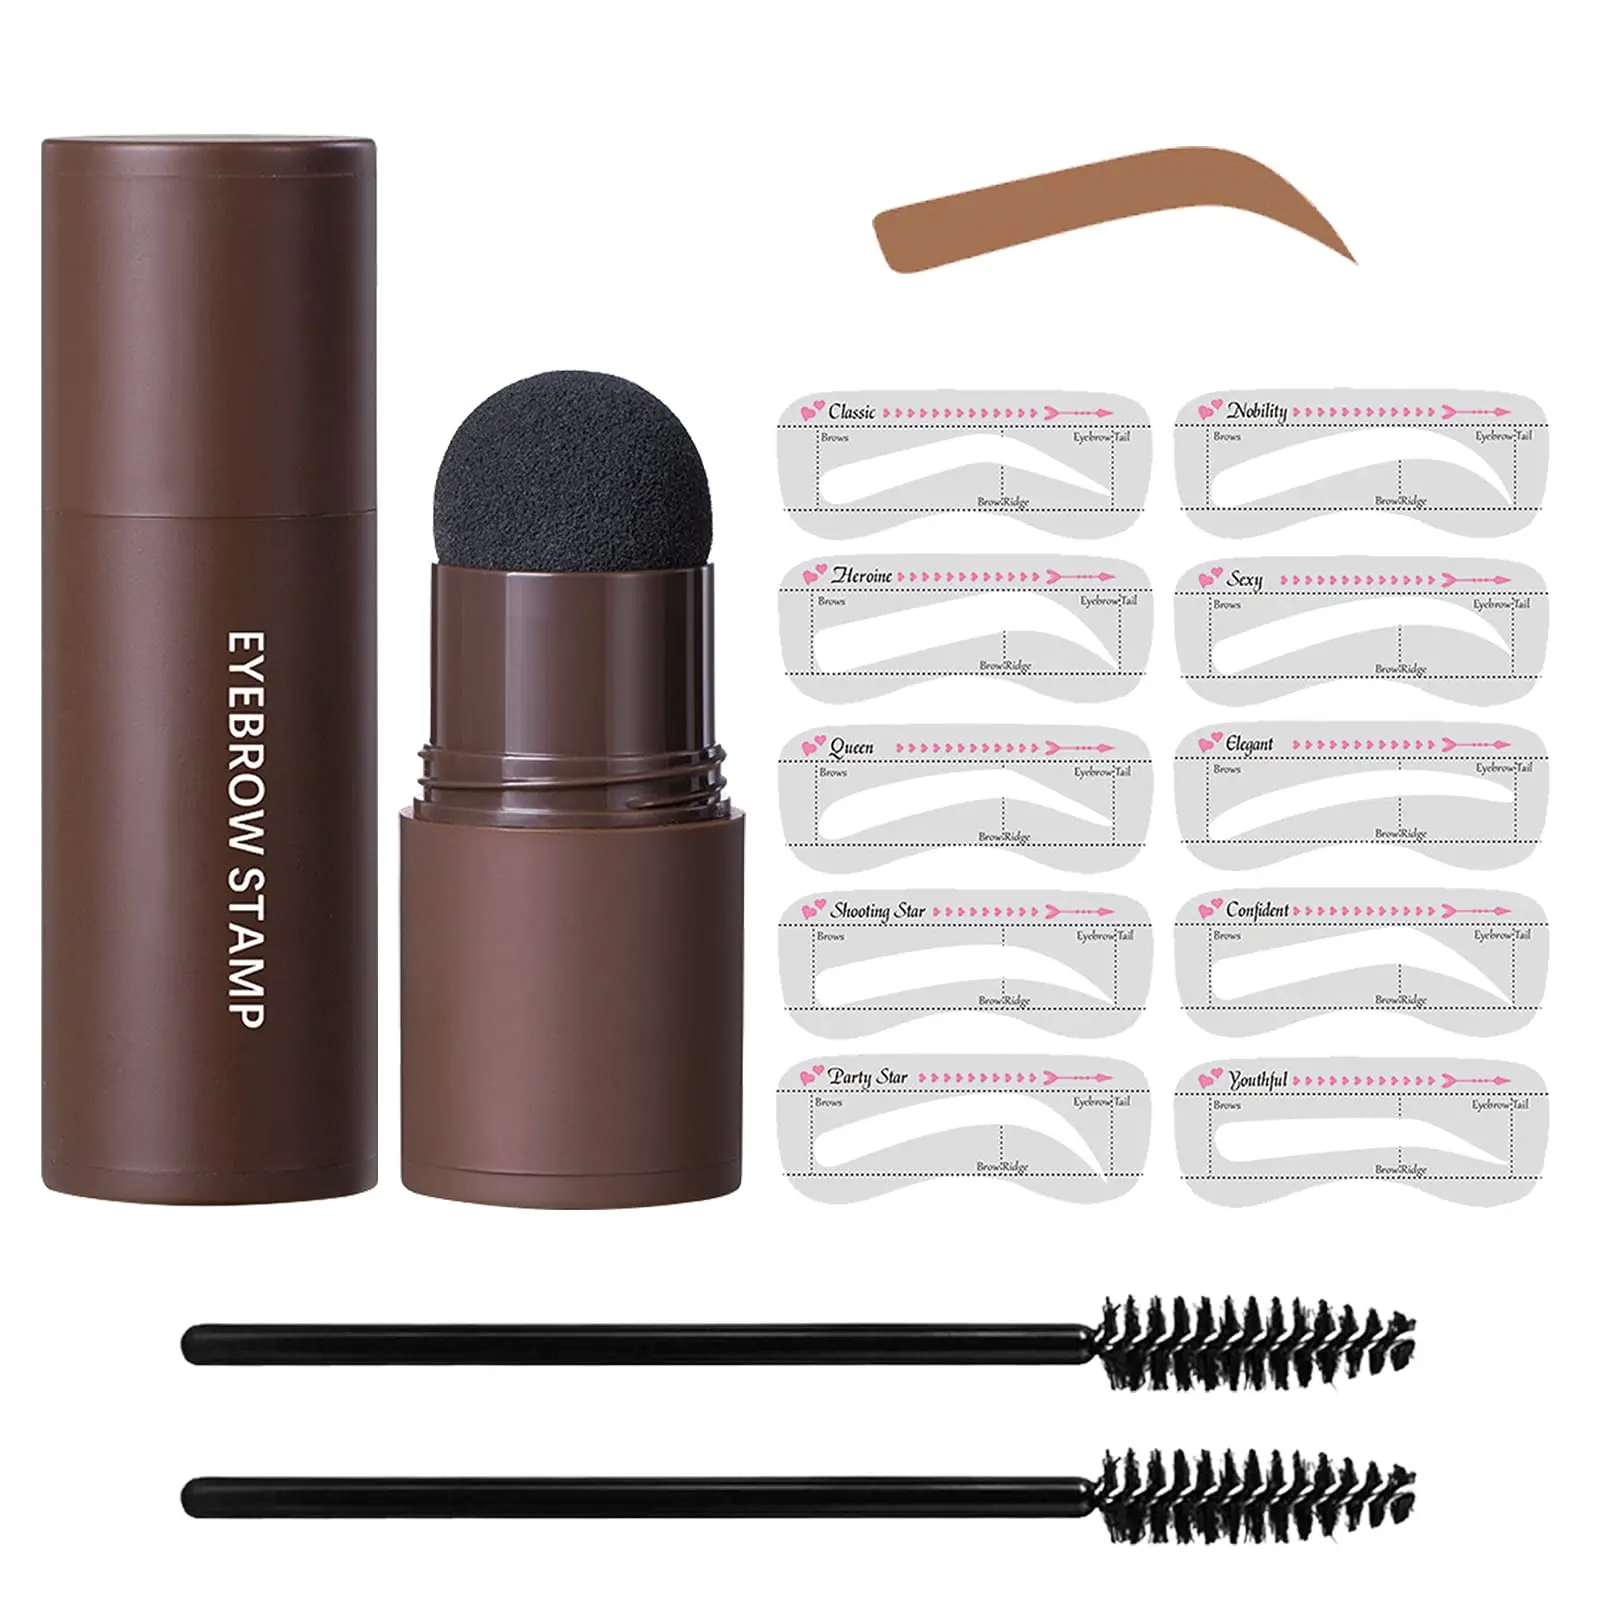 

Waterproof Wholesale One Step Eyebrow Powder Makeup Long Lasting Eyebrow Stamp Shaping Kit With 10 Reusable Eye Brow Stencils, 3 colors